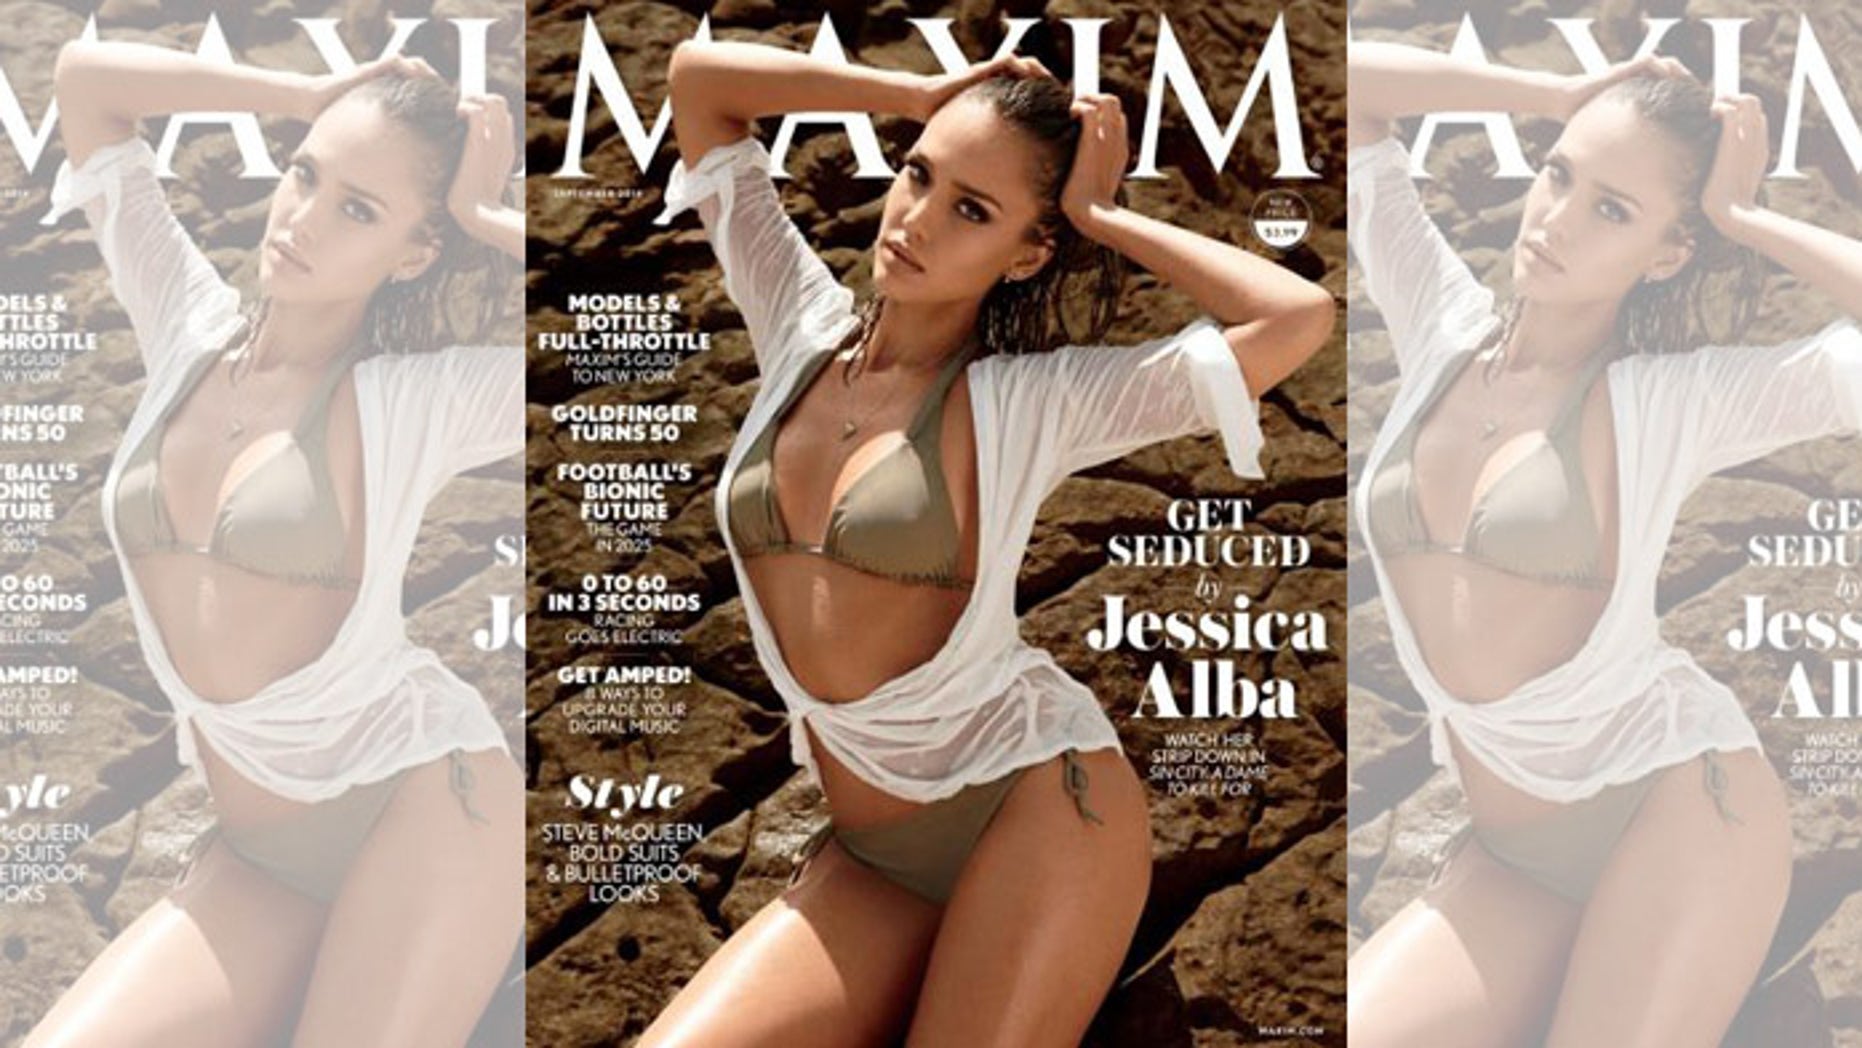 Jessica Alba Talks Overcoming Demons In Sizzling Maxim Cover Story